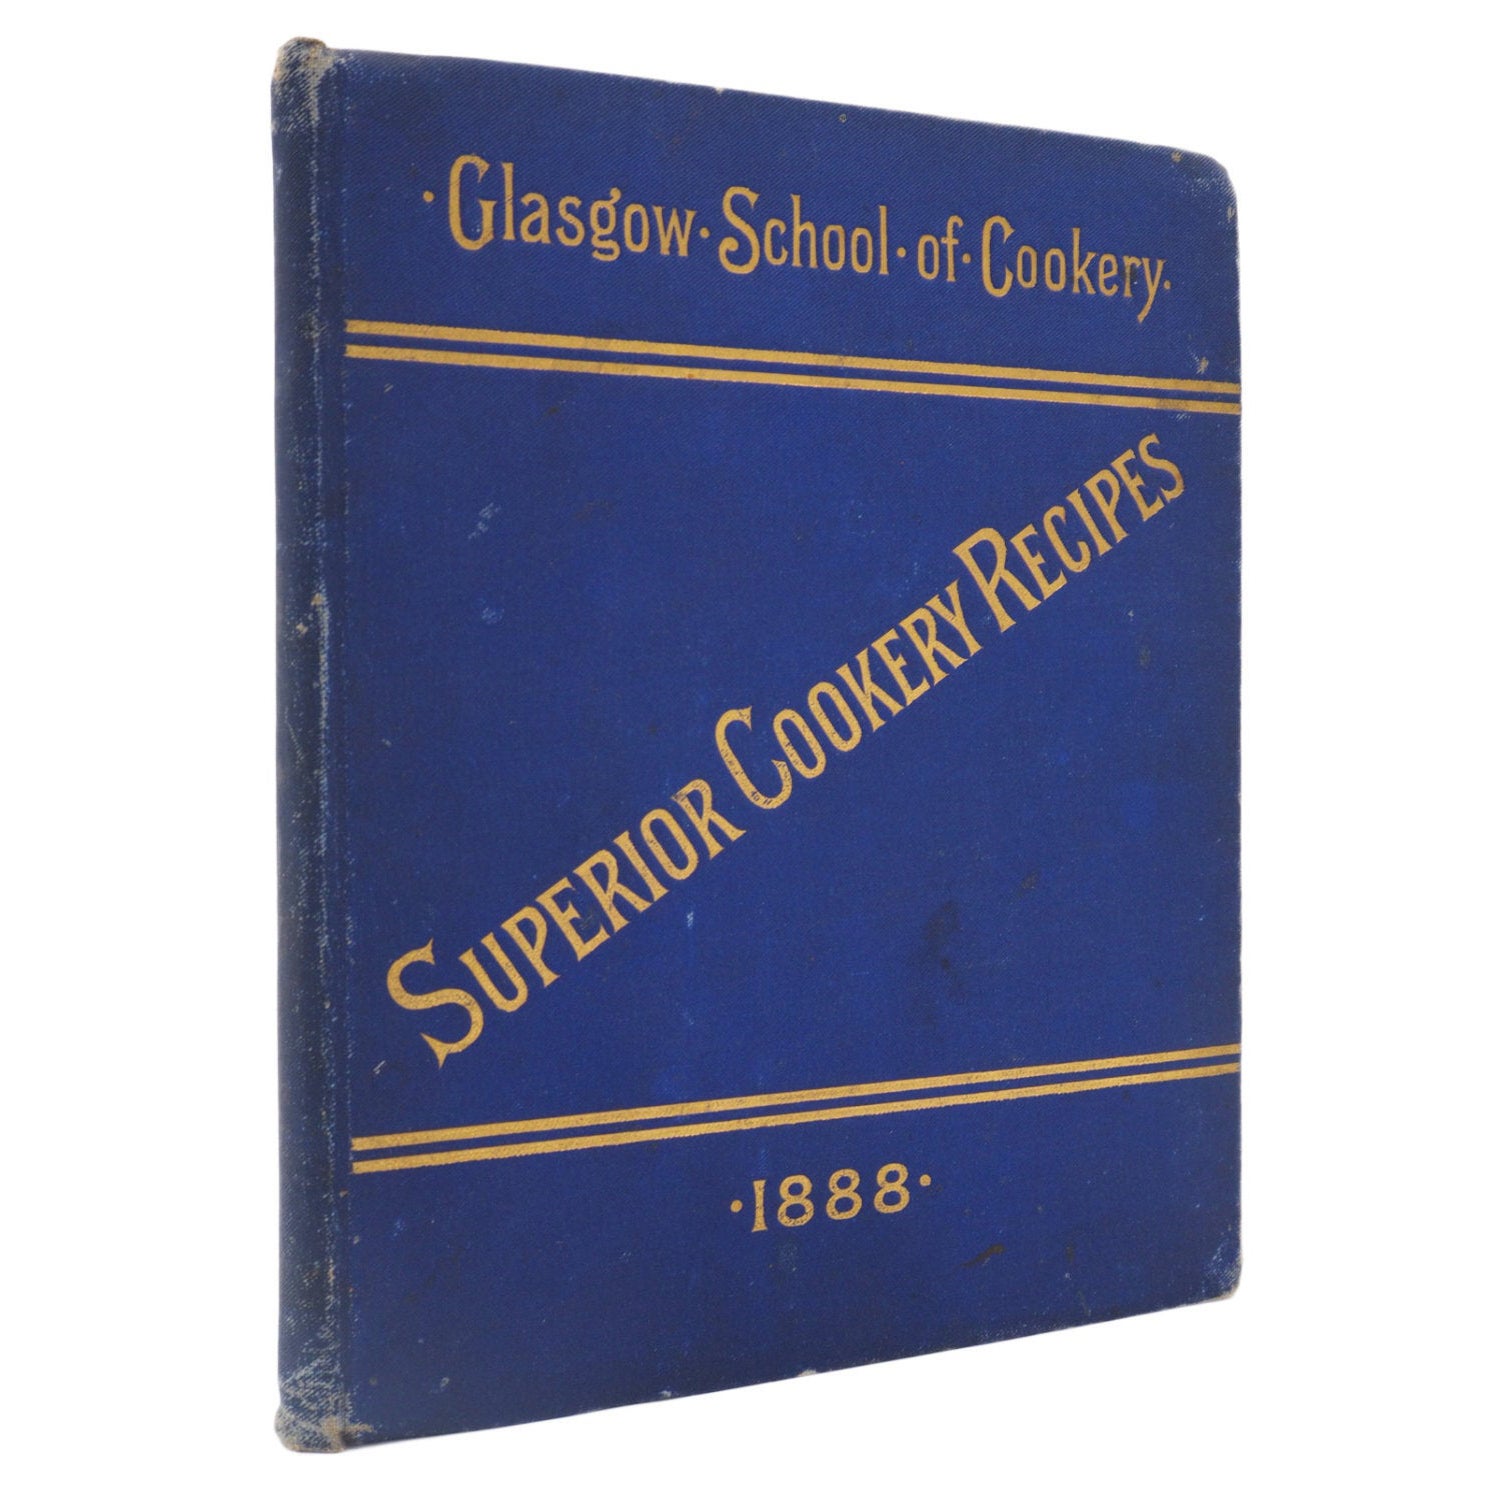 Vintage Culinary Charm: Recipes Published in 1888 by Glasgow School of Cookery For Sale